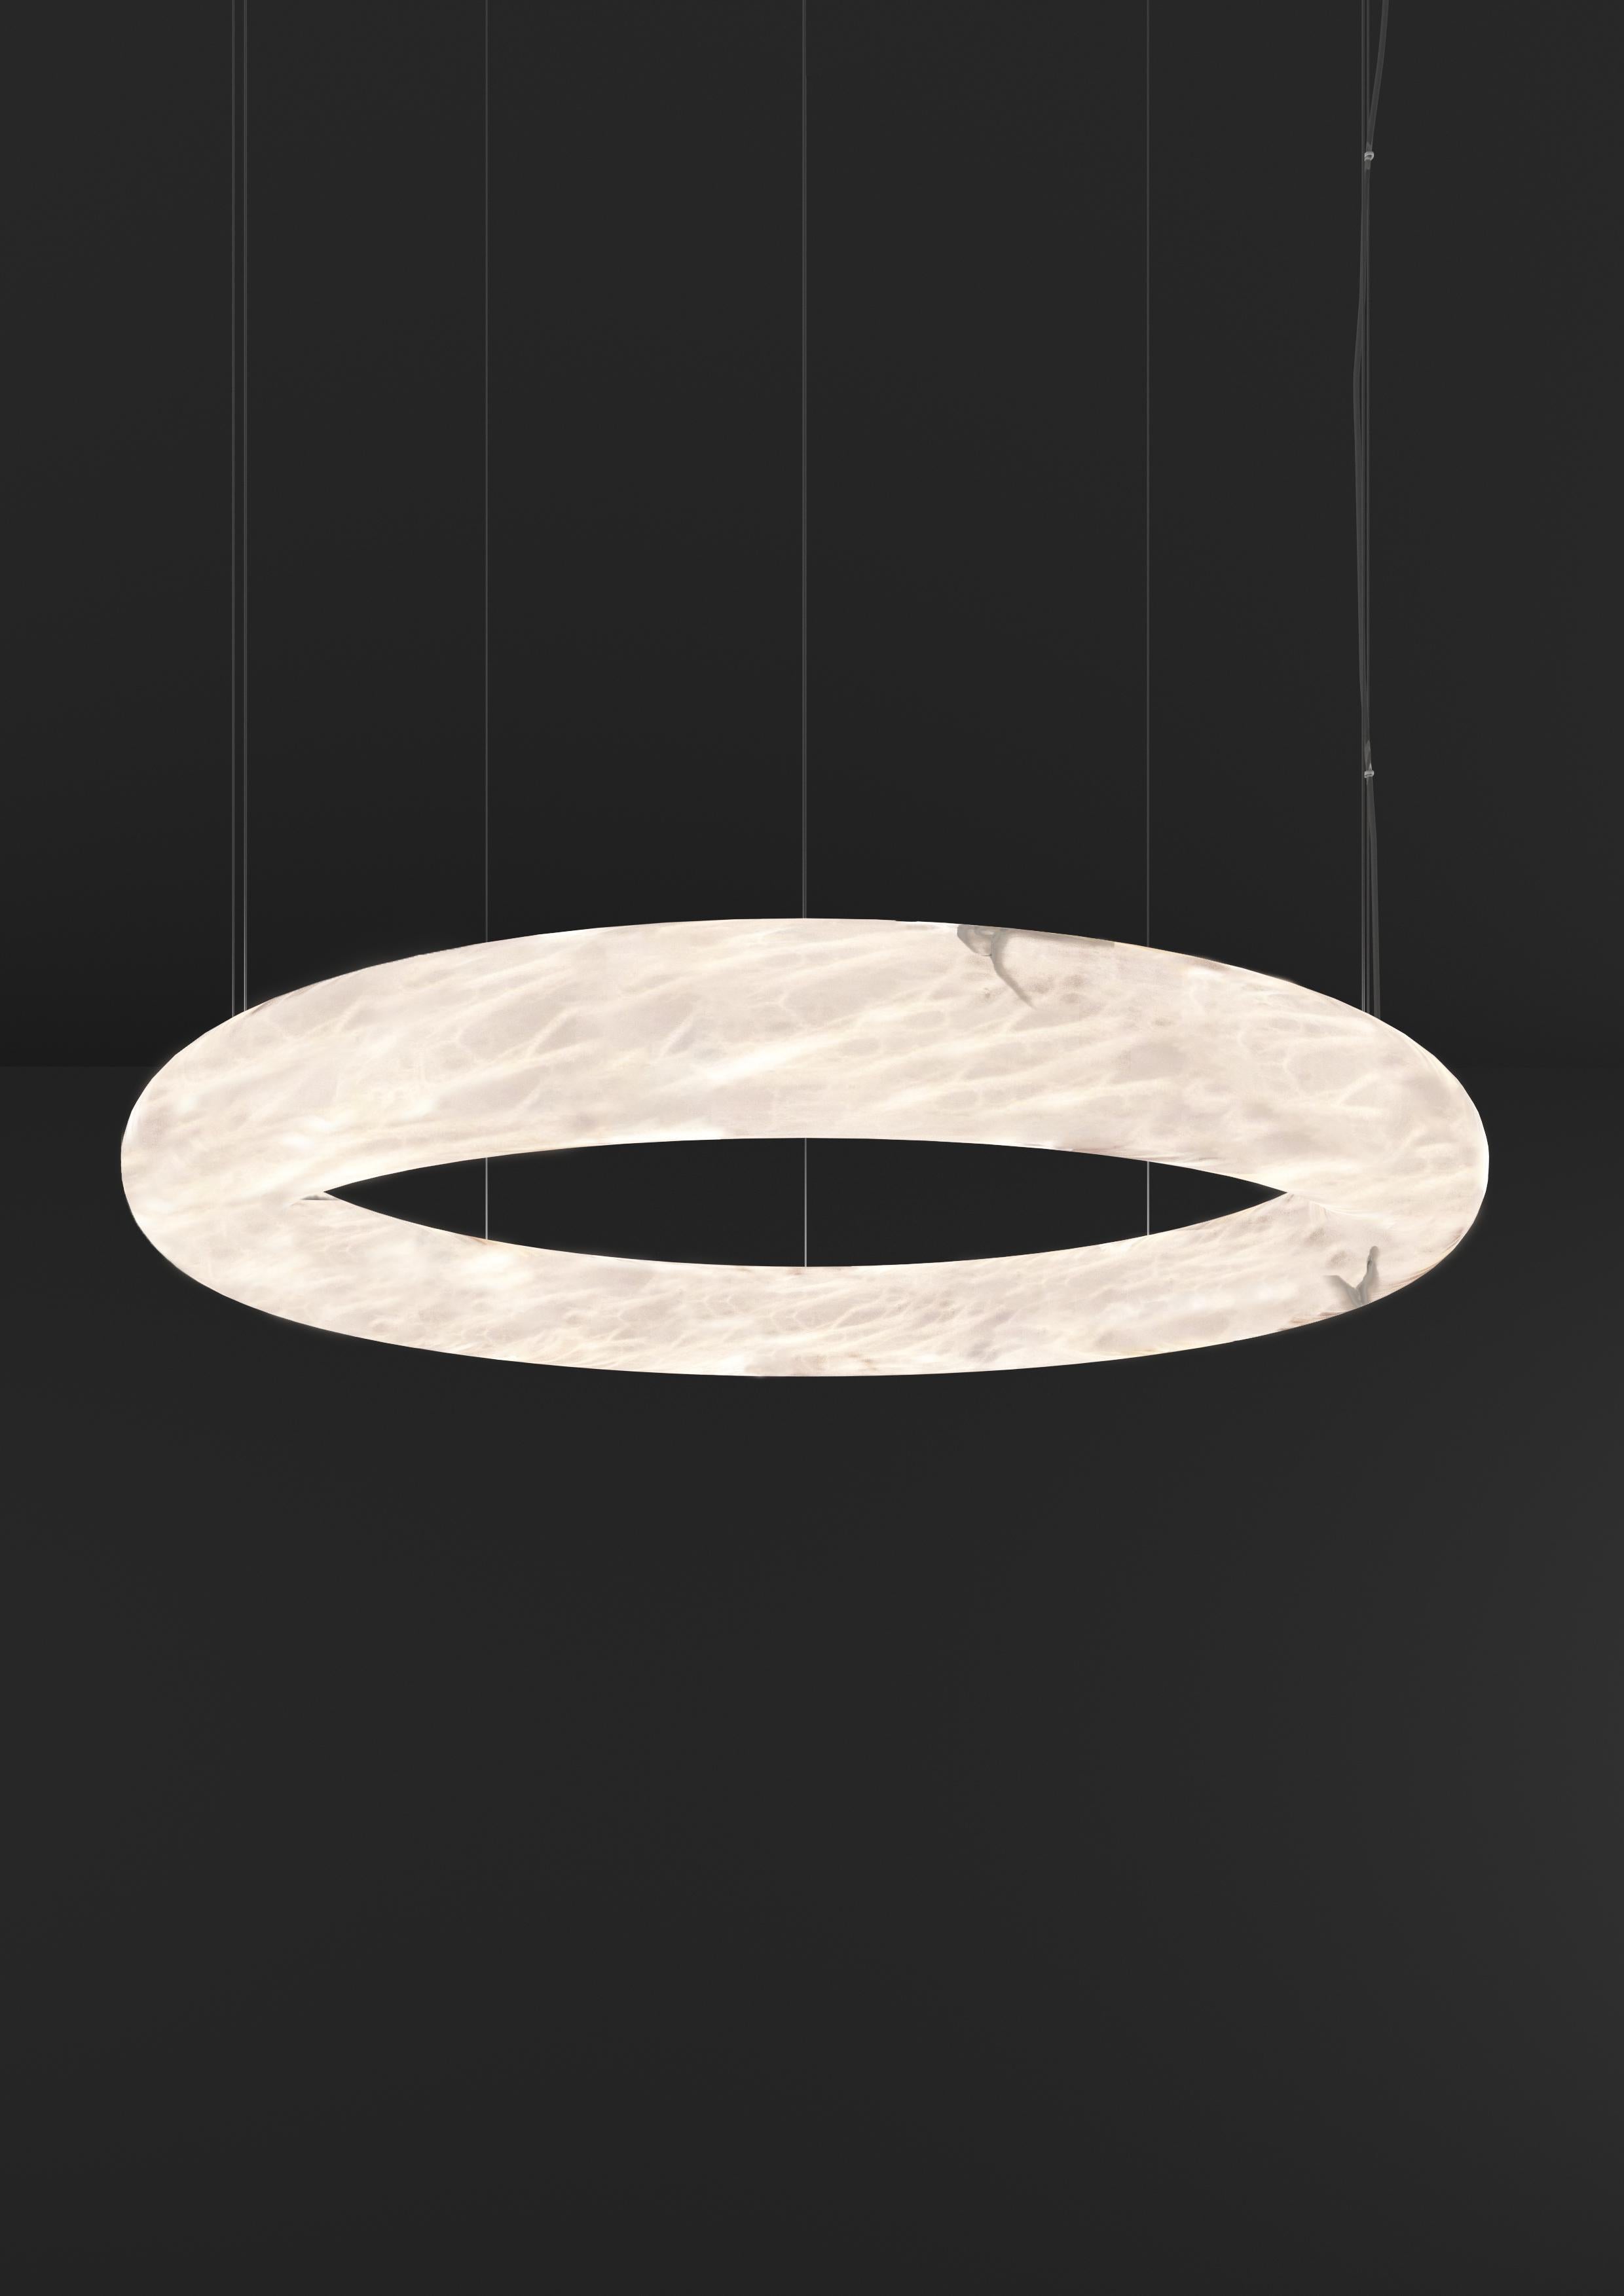 Aura Pendant Light 80 by Alabastro Italiano
Dimensions: Ø 80 x H 8 cm.
Materials: Glass, cable, brushed black metal.
Other finishes available. Please contact us.

2 x Strip LED, 101 Watt 10195 Lumen, 24 V, 3000 K.

All our lamps can be wired